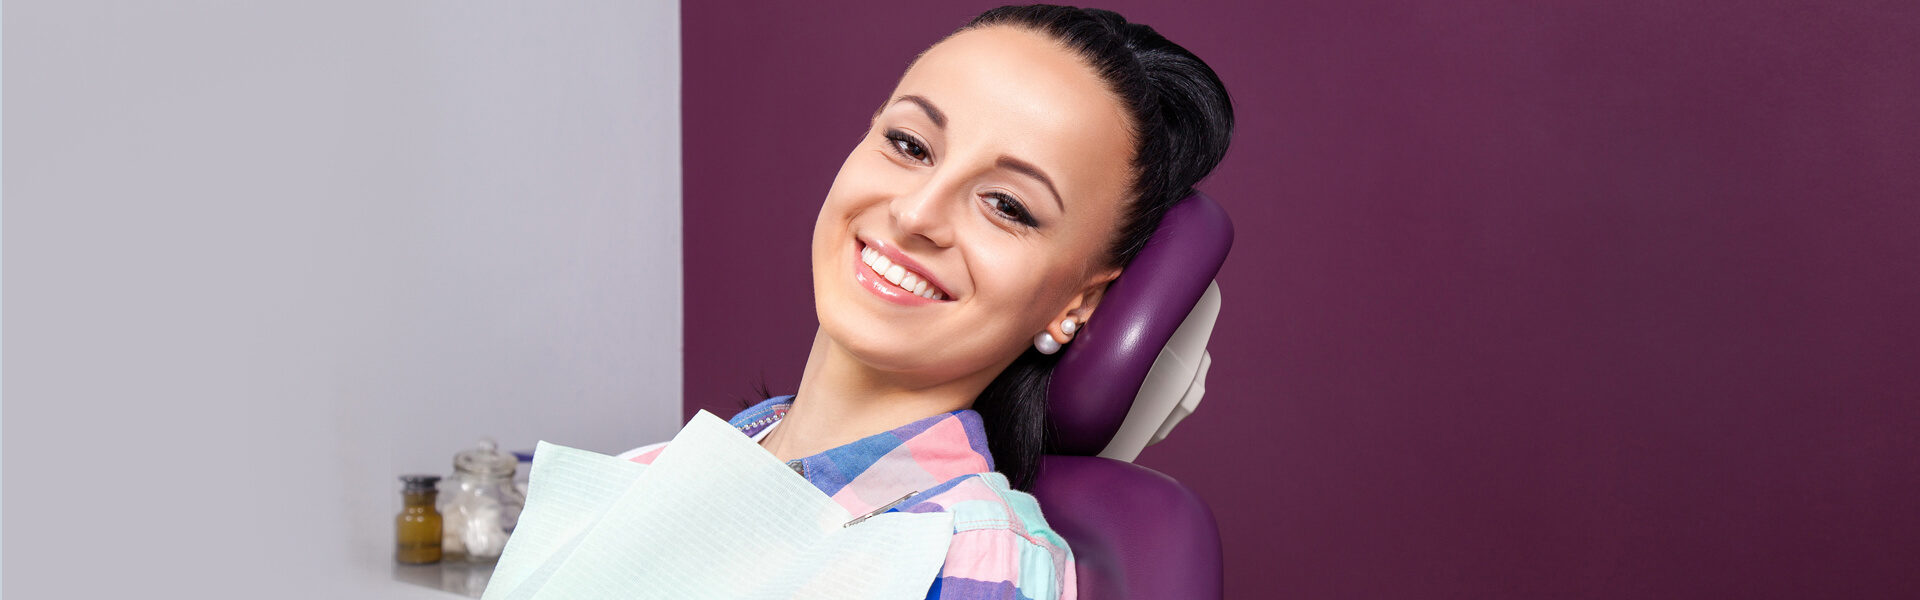 Teeth Cleaning in Spring and Richmond, TX, 77388